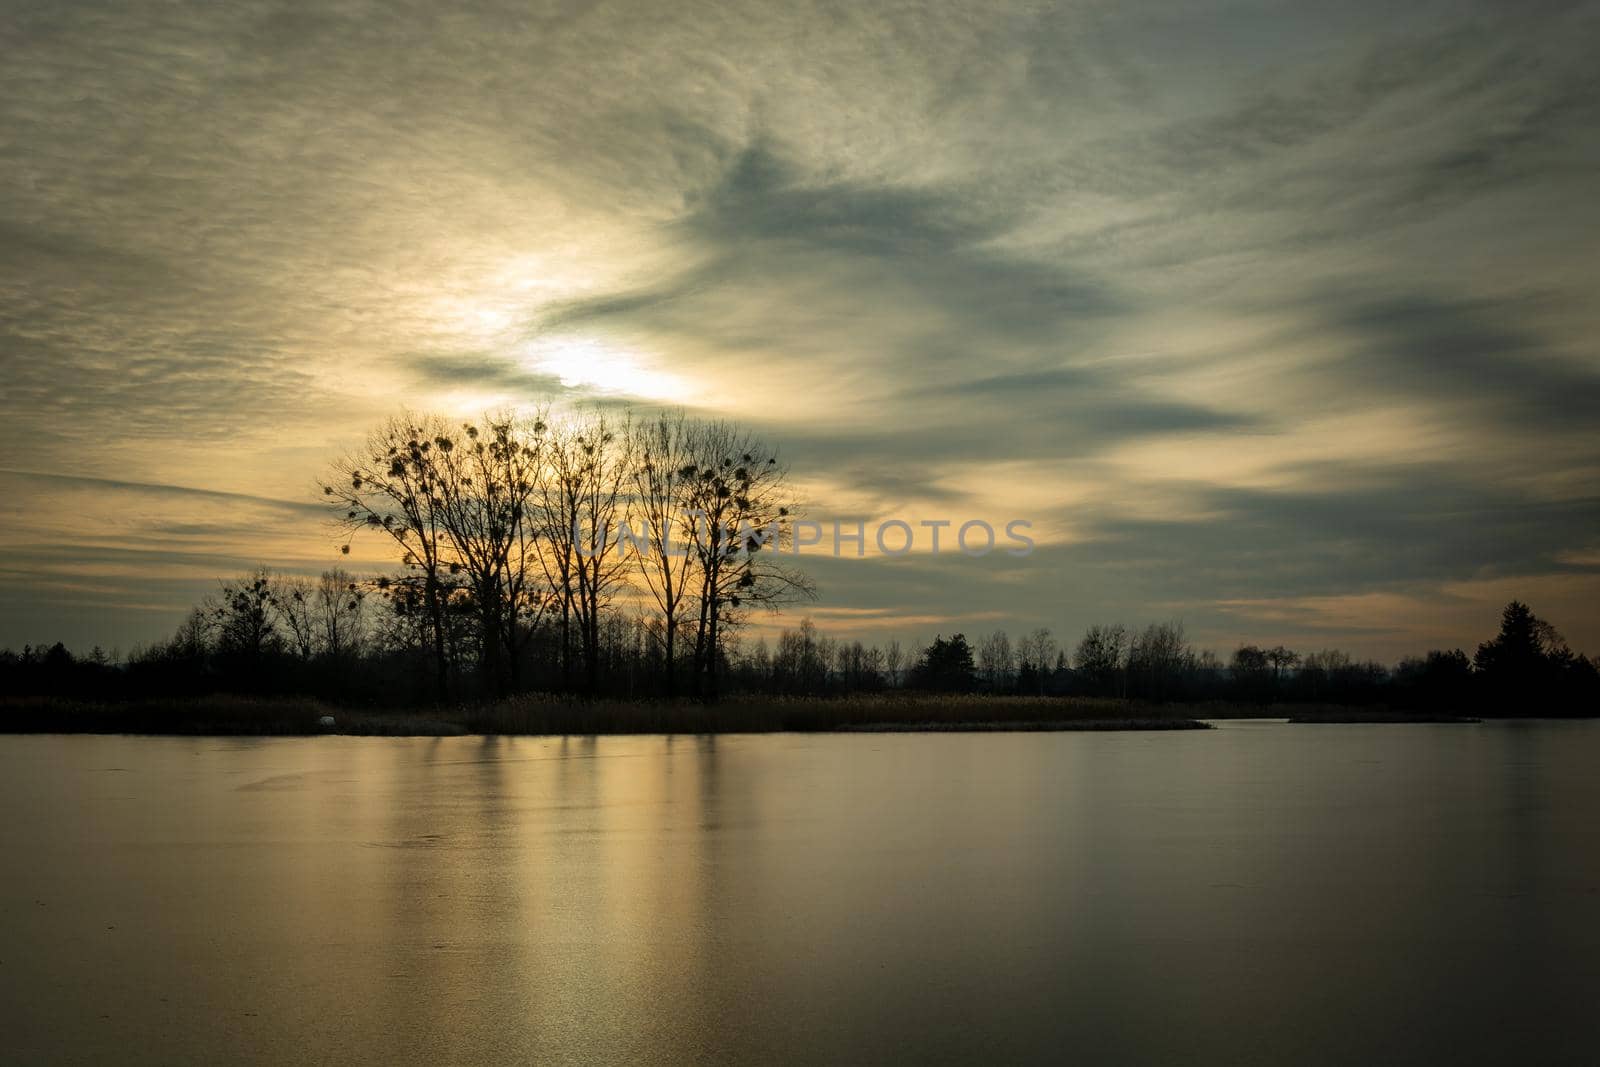 The sun behind the clouds over the frozen lake and trees on the shore, Stankow, Poland